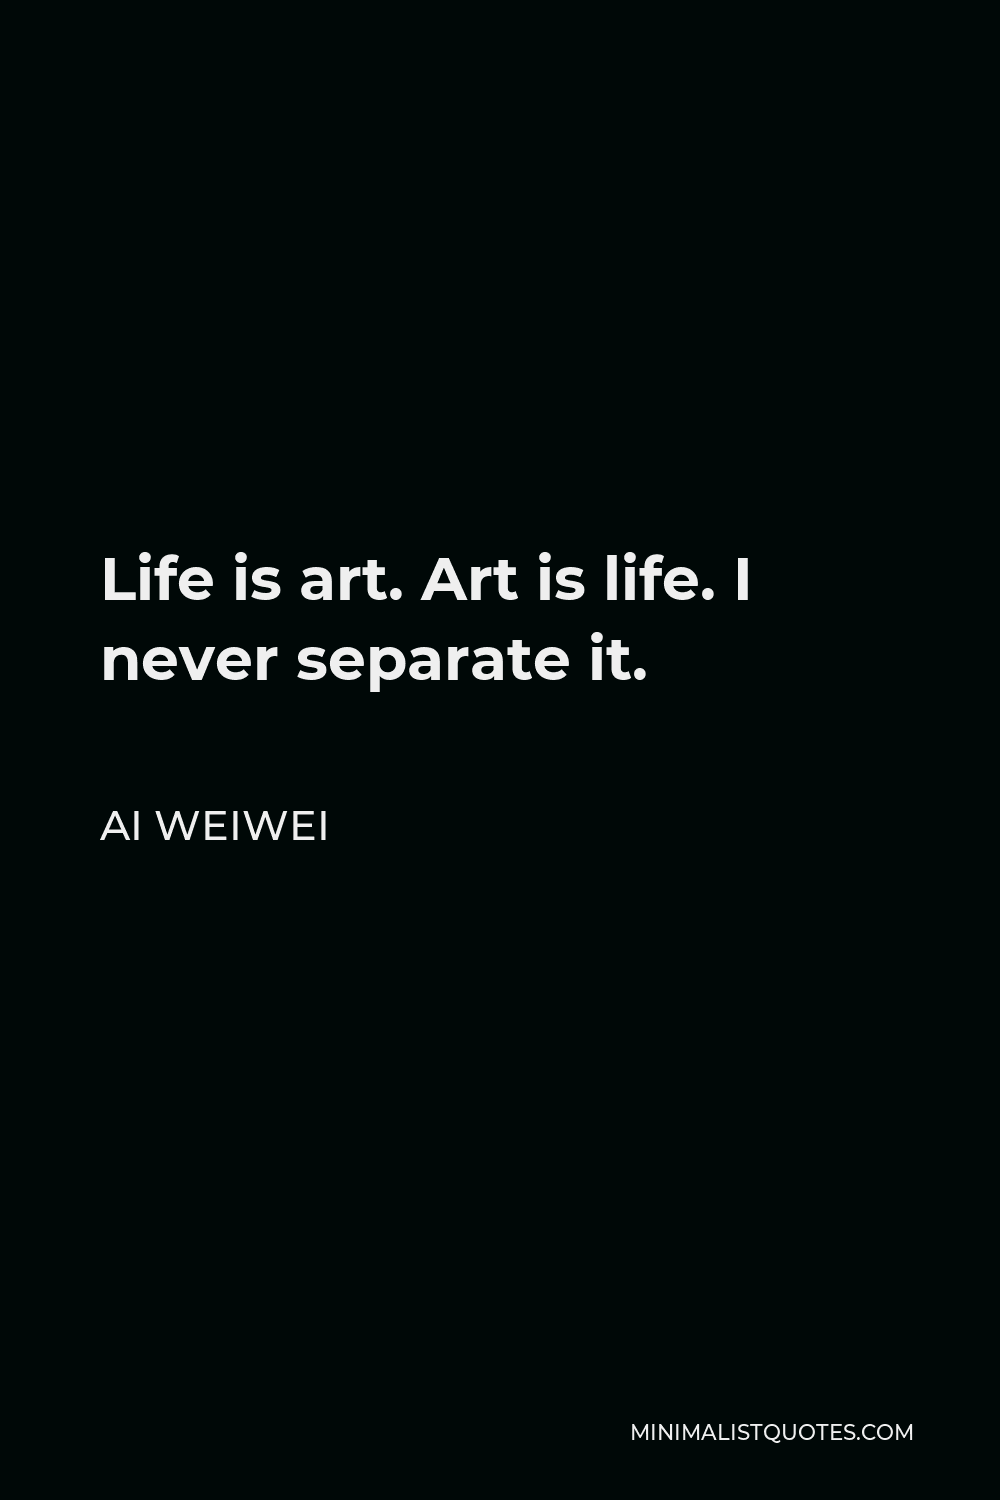 Ai Weiwei Quote - Life is art. Art is life. I never separate it.